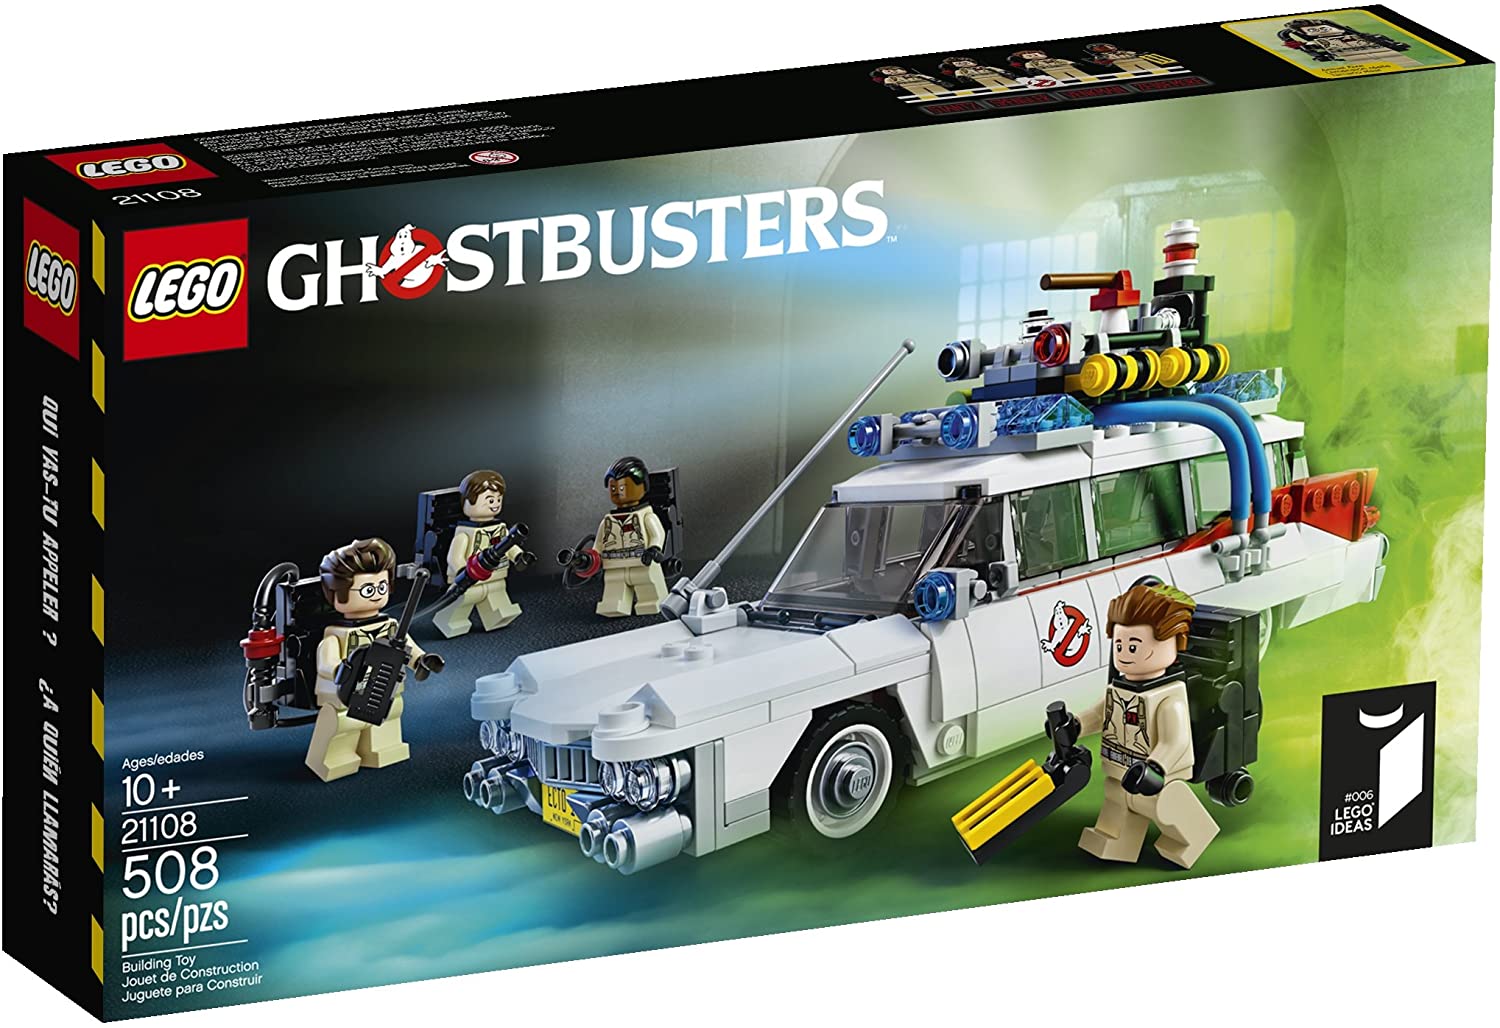 LEGO Creator Ghostbusters Ecto-1 Rumored for - Brick Fan